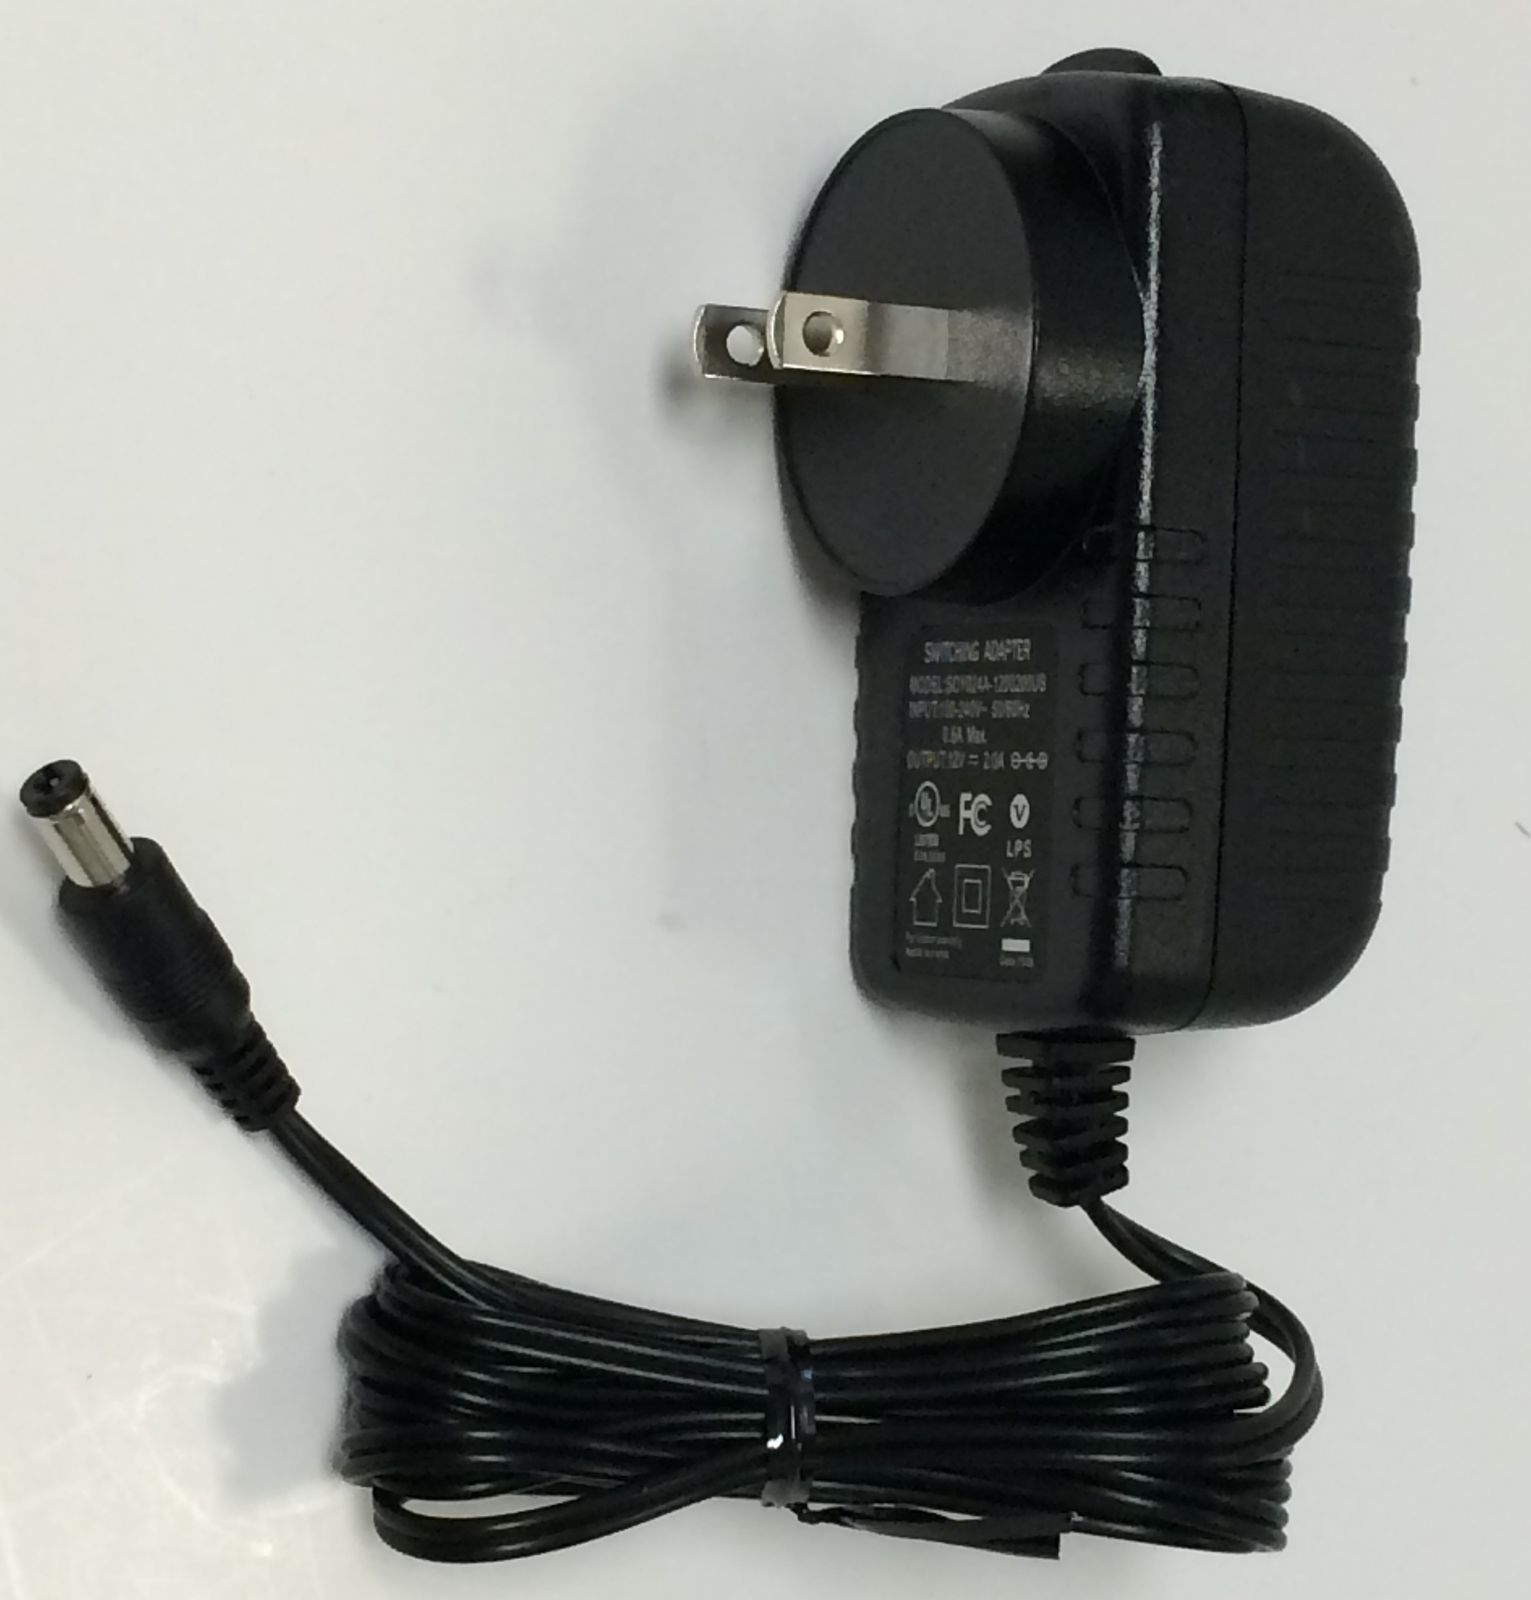 Brand new 12V 2A Switching Power Adapter SOY024A-1200200US AC DC ADAPTER Specification: Brand: Ge